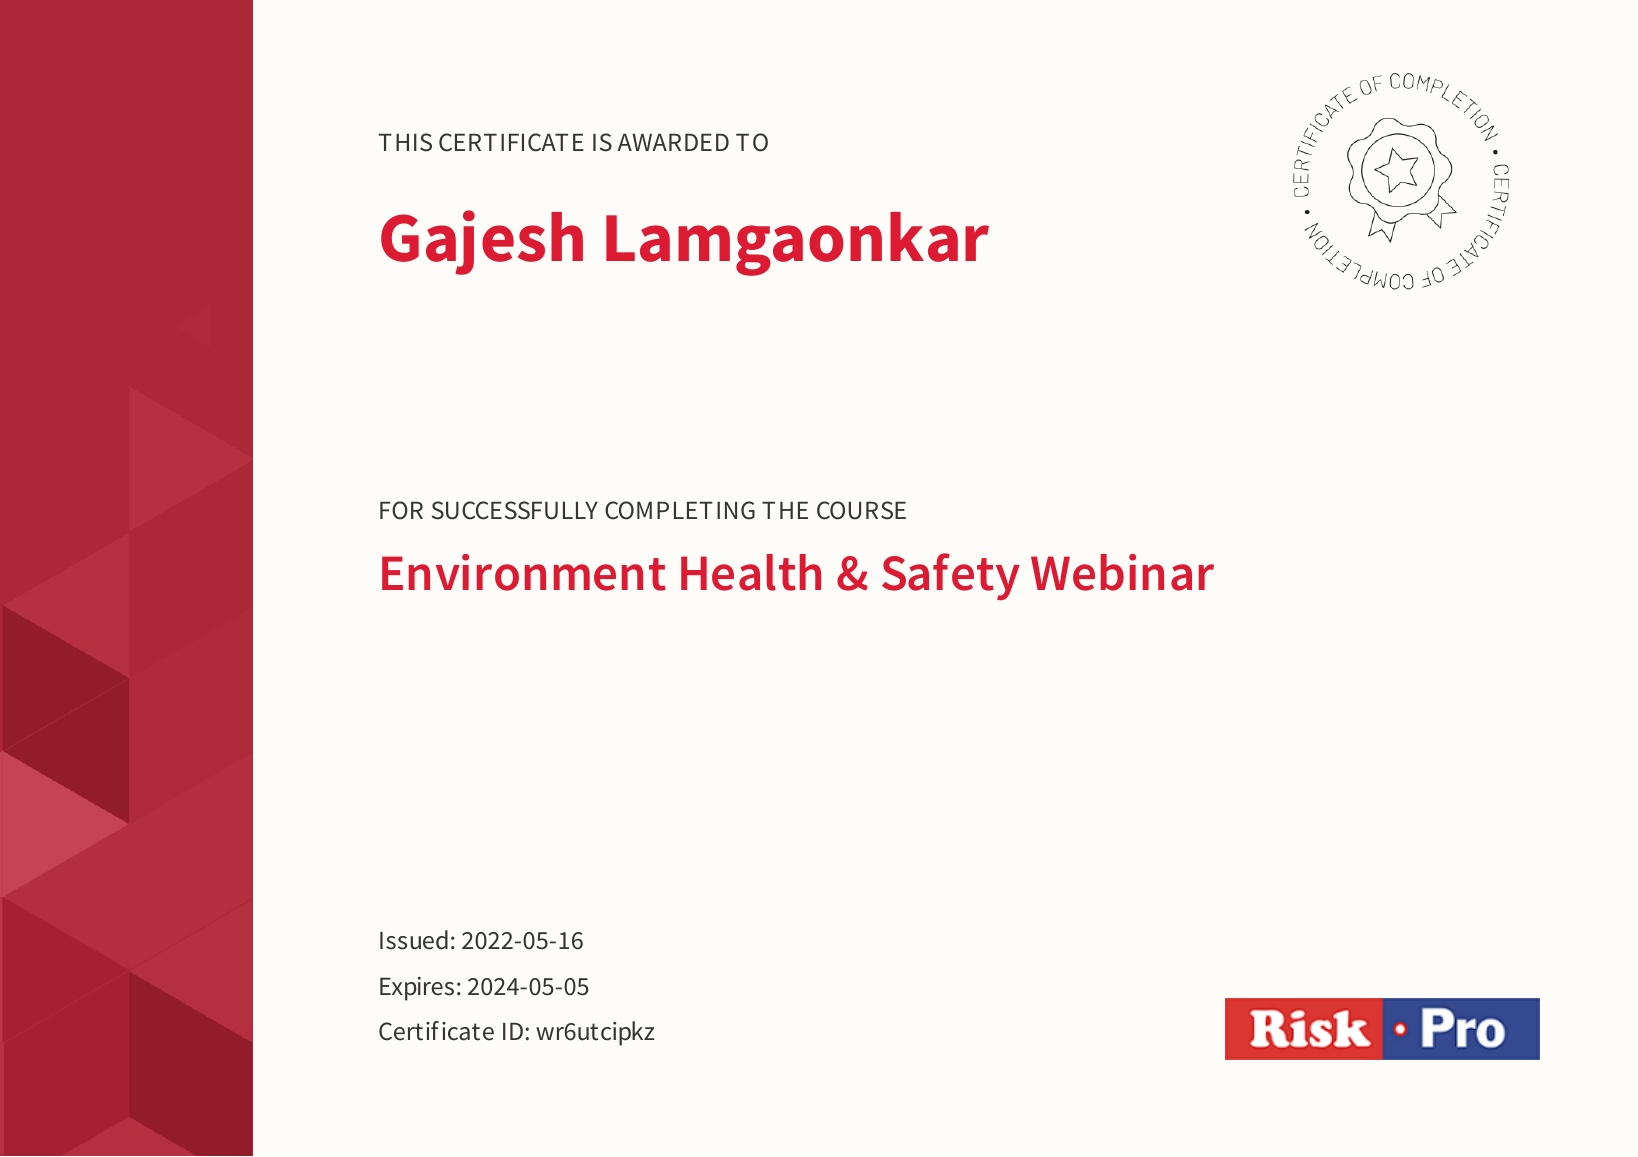 THIS CERTIFICATE ISAWARDED TO

Gajesh Lamgaonkar

FOR SUCCESSFULLY COMPLETING THE COURSE

Environment Health & Safety Webinar

Issued: 2022-05-16
Expires: 2024-05-05

Certificate ID: wréutcipkz